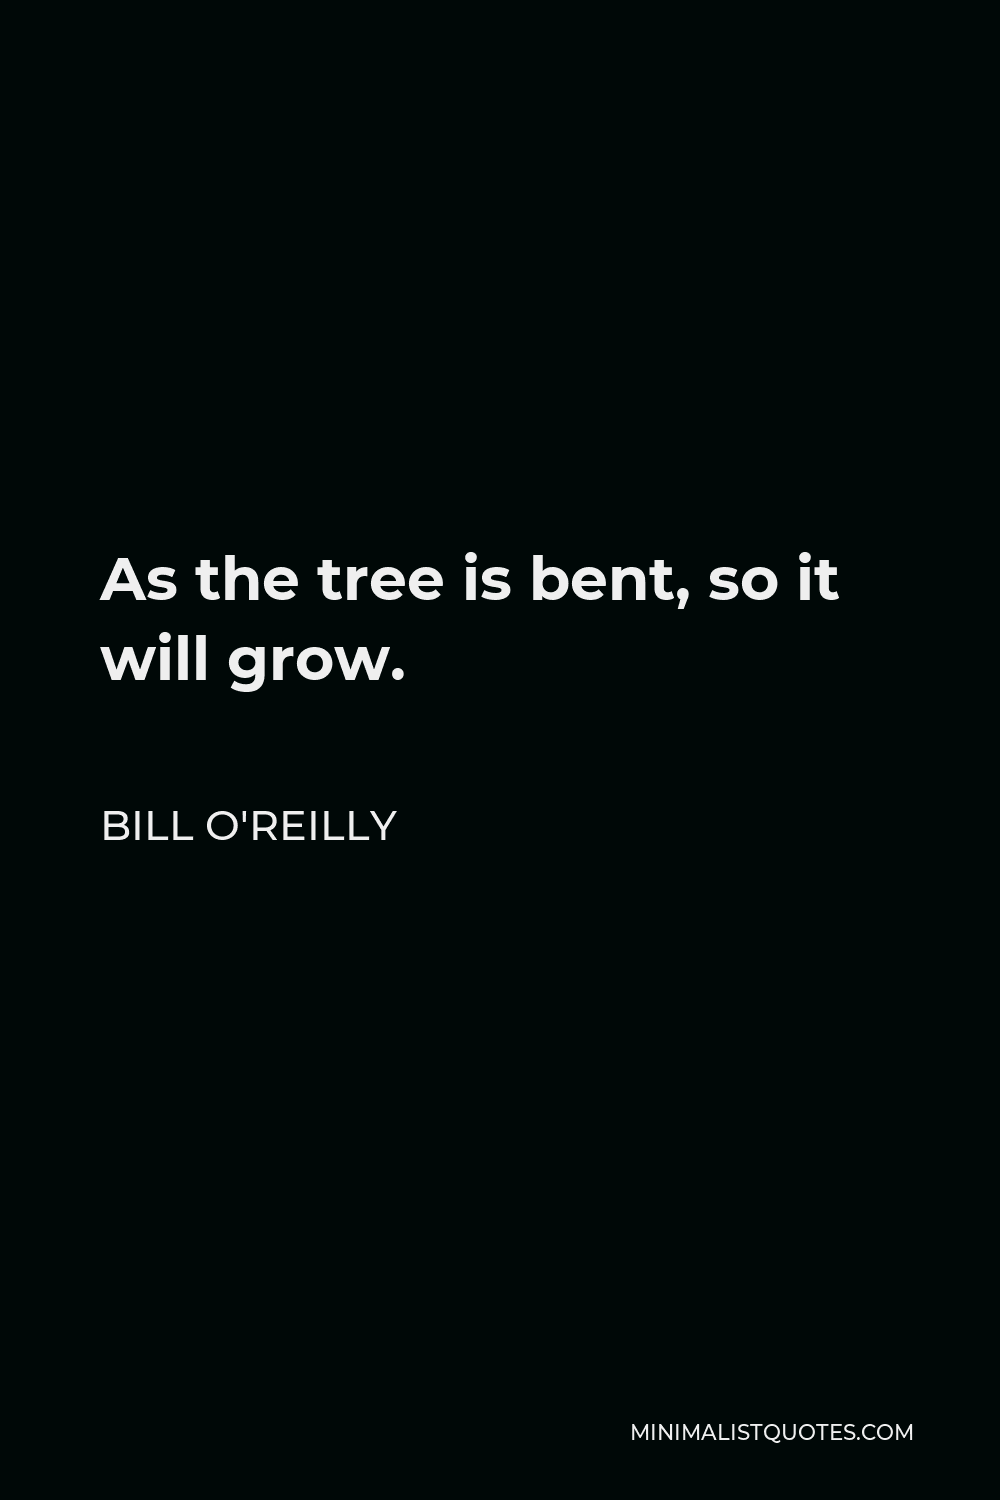 Bill O'Reilly Quote - As the tree is bent, so it will grow.